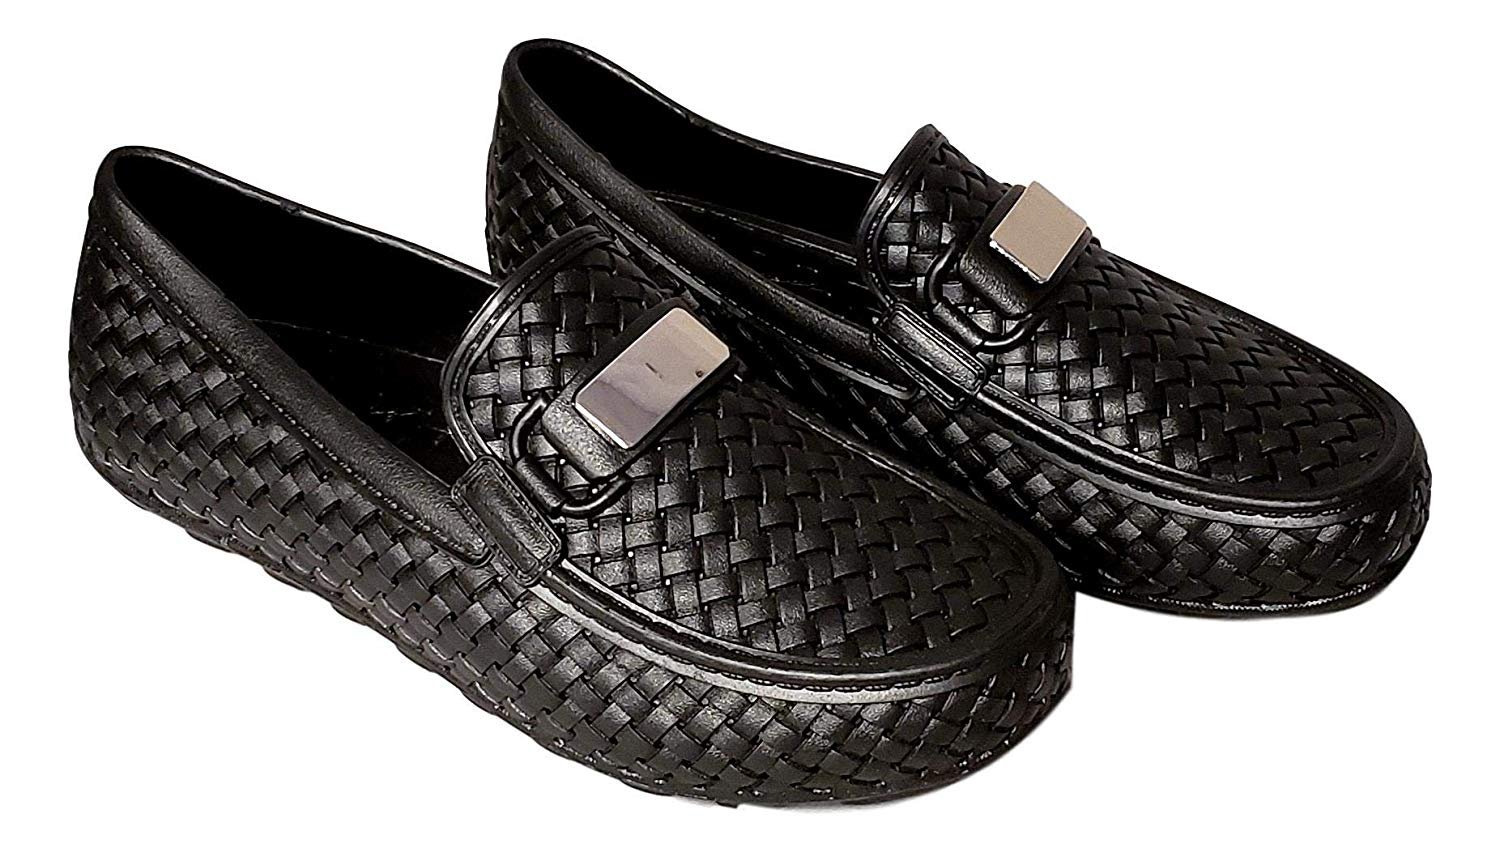 Mens Water Shoe Floater Loafers Classic Look Drivers 9 US M Mens, Black - image 2 of 6